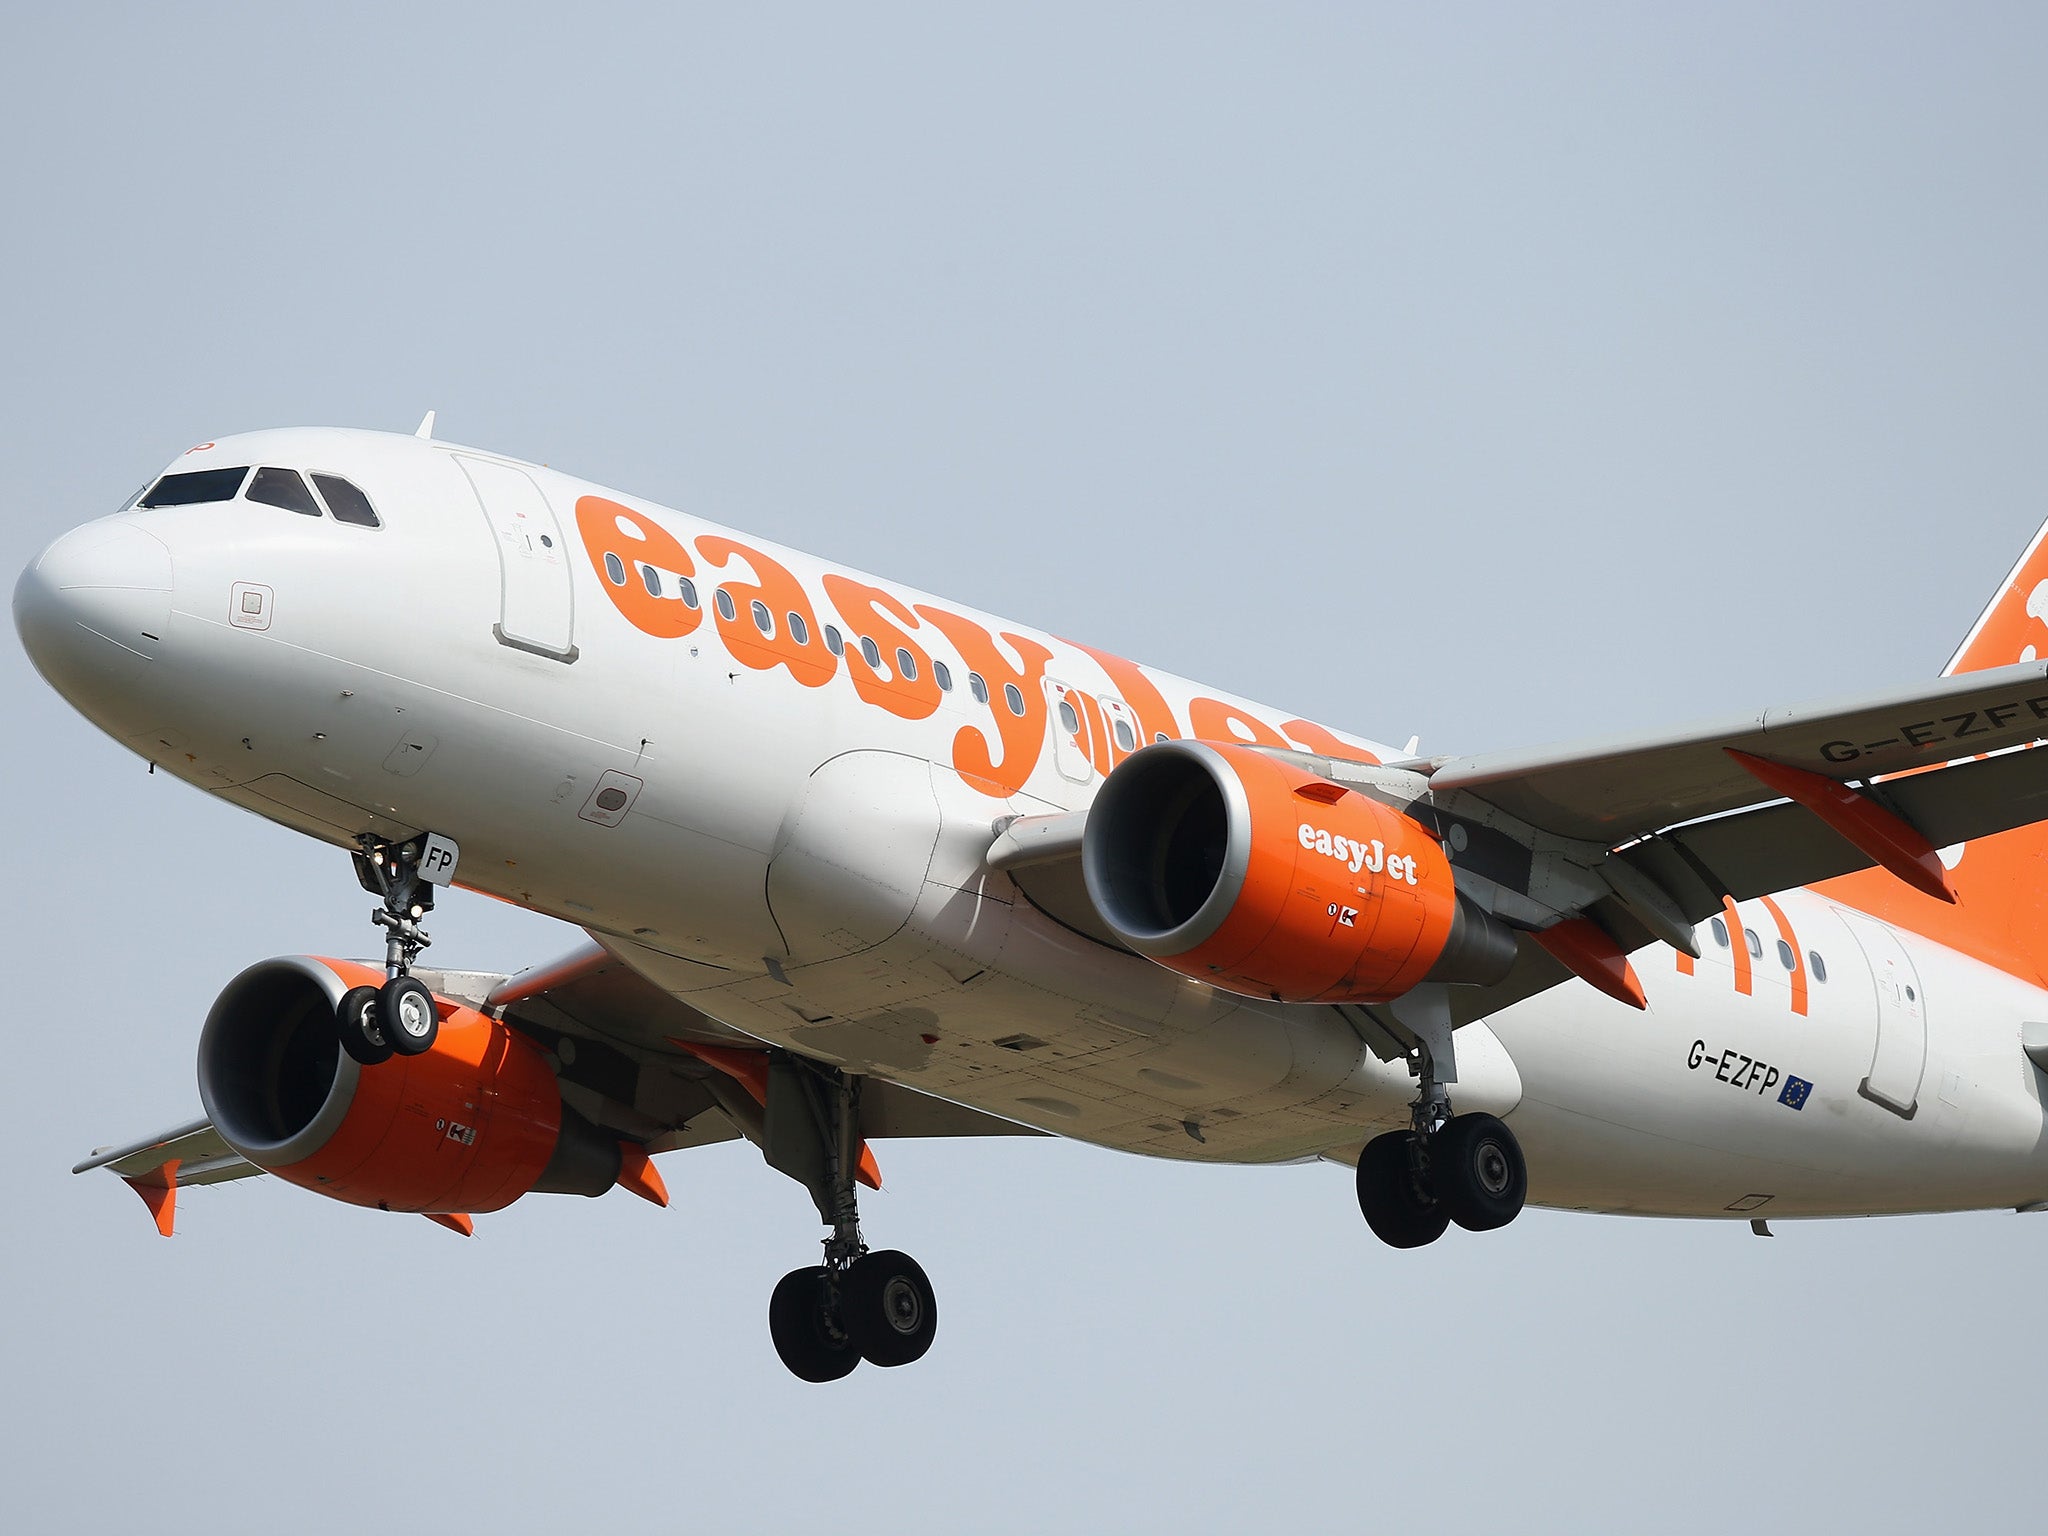 Easyjet Confirms Acquisition Of Air Berlin Assets The Independent The Independent